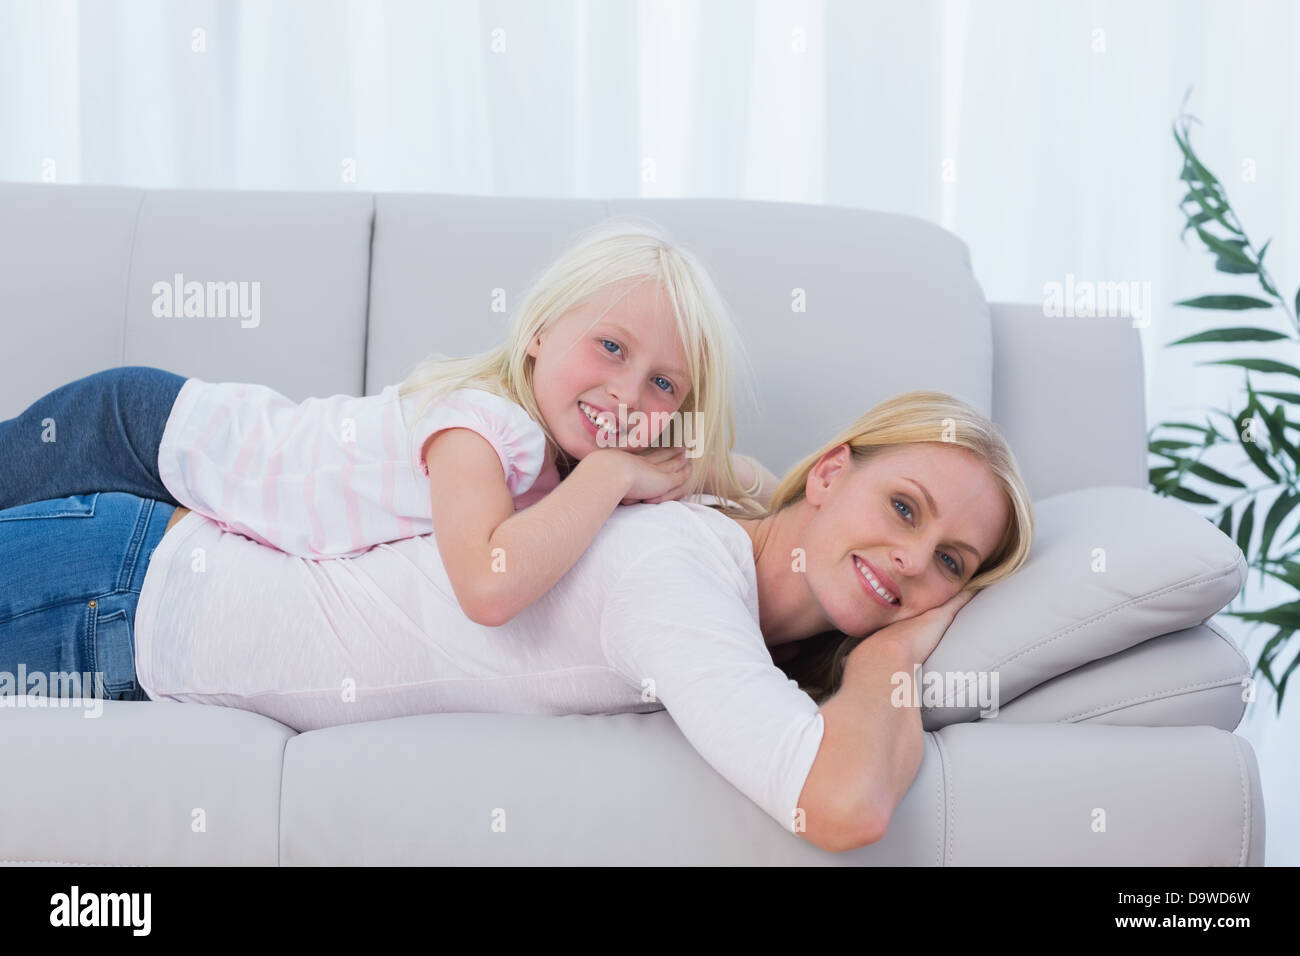 Mother lying on couch with her daughter on her back Stock Photo